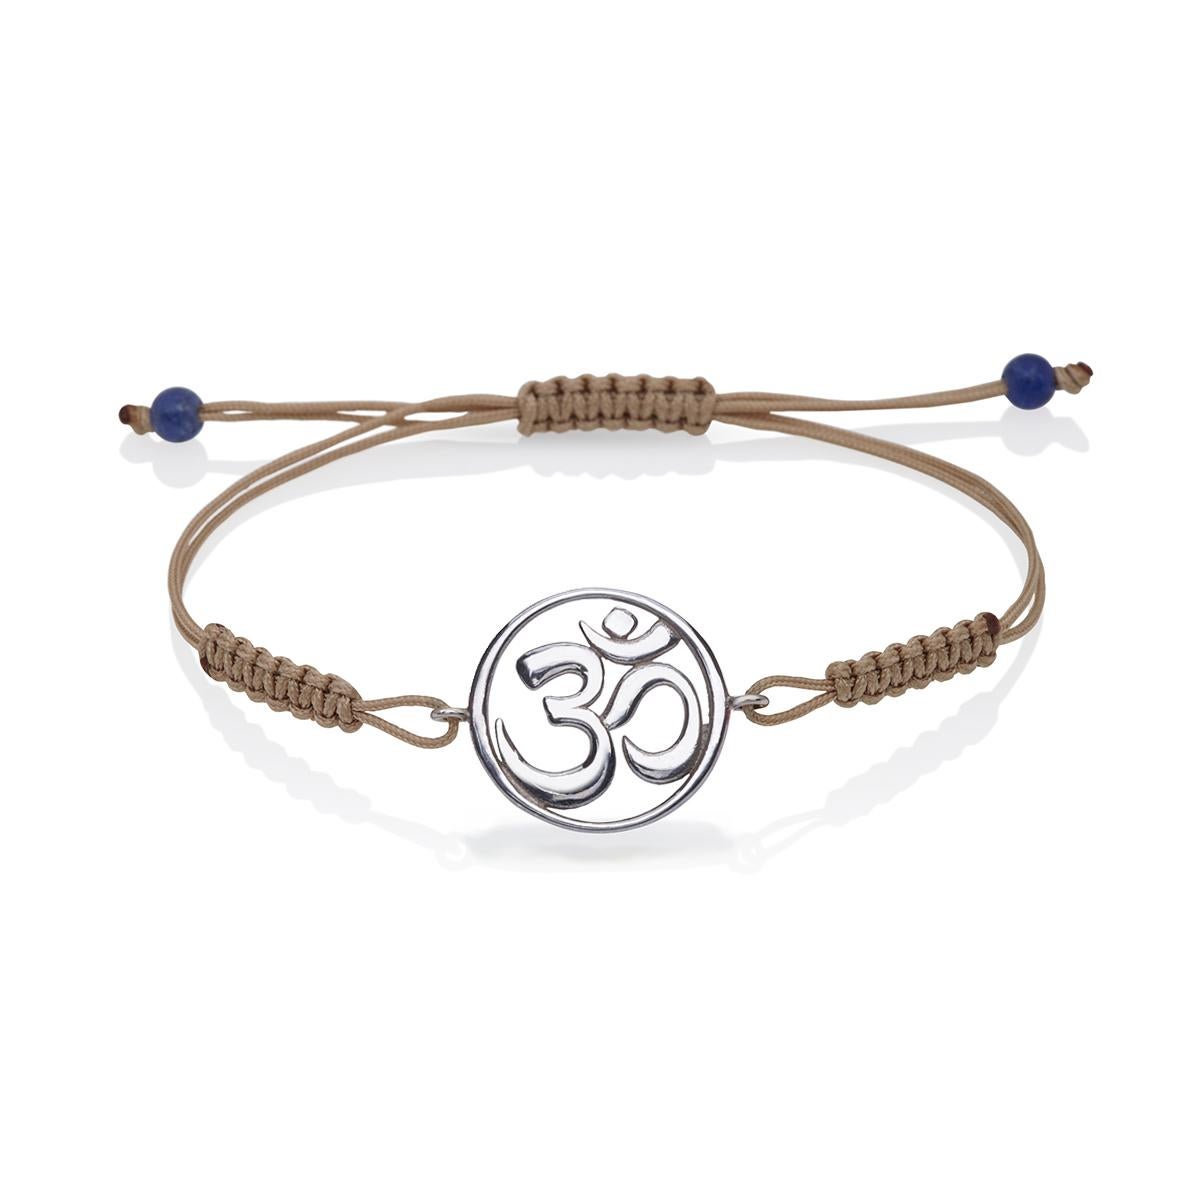 Macrame Bracelet with the Om Symbol in 14Kt white Gold with Colored brown Cord and lapis lazuli Gift for Her.
A very beautiful and wearable macrame bracelet made of 14Kt Gold with the Om Symbol. It will match with everything in your closet. Designed